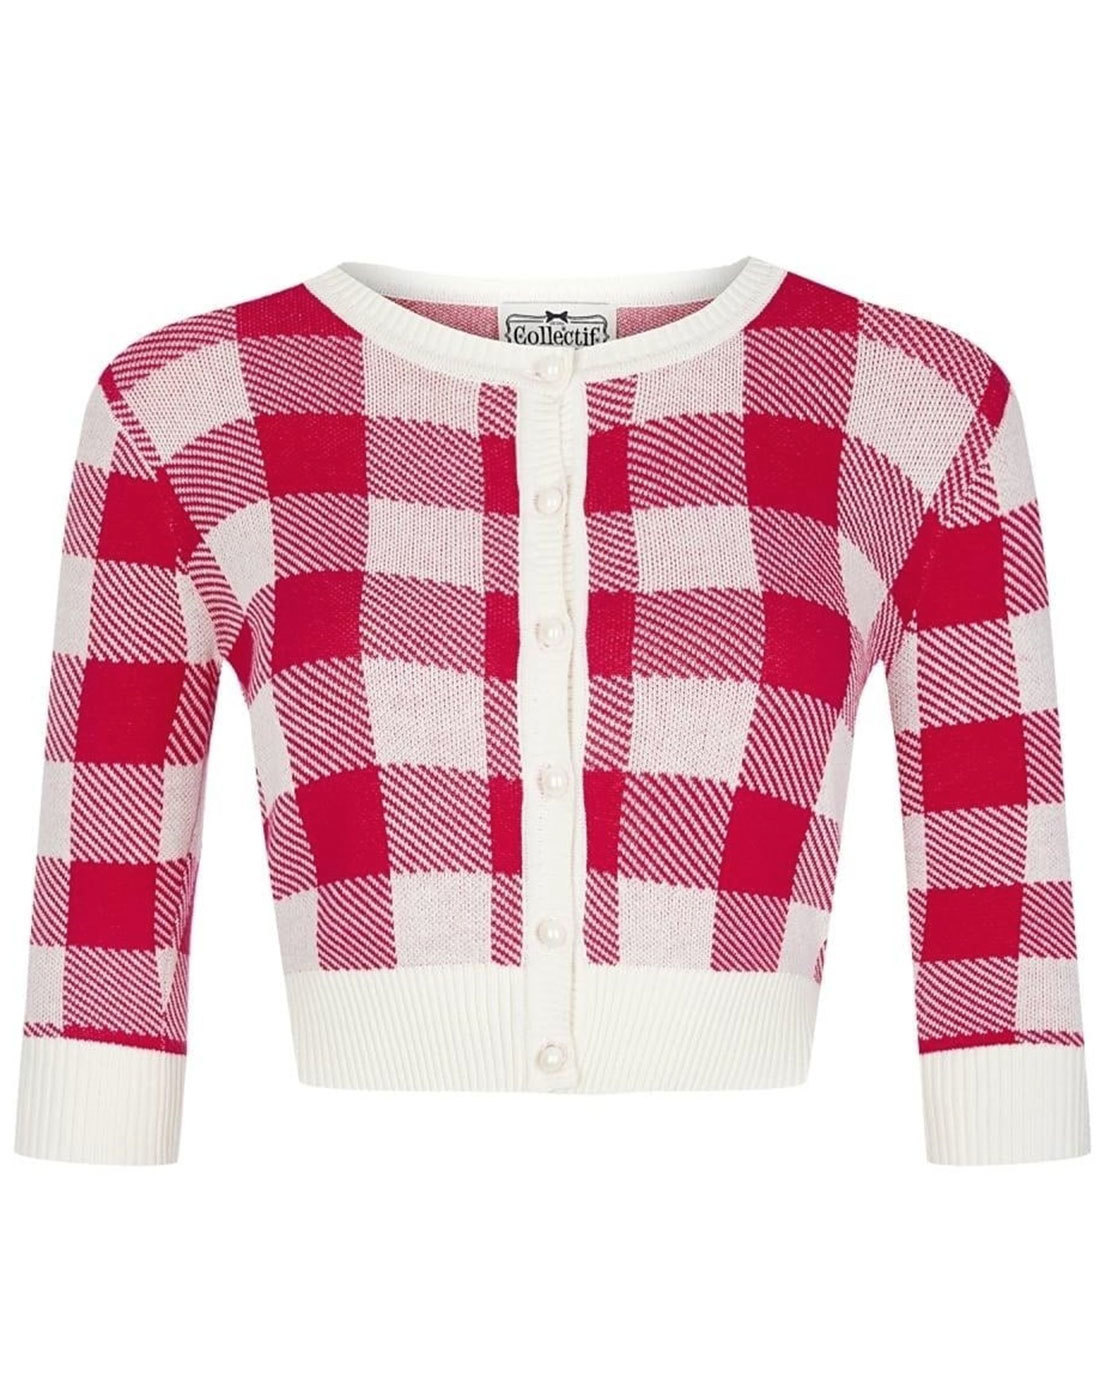 Lucy COLLECTIF Retro 1950s Gingham Cardigan RED